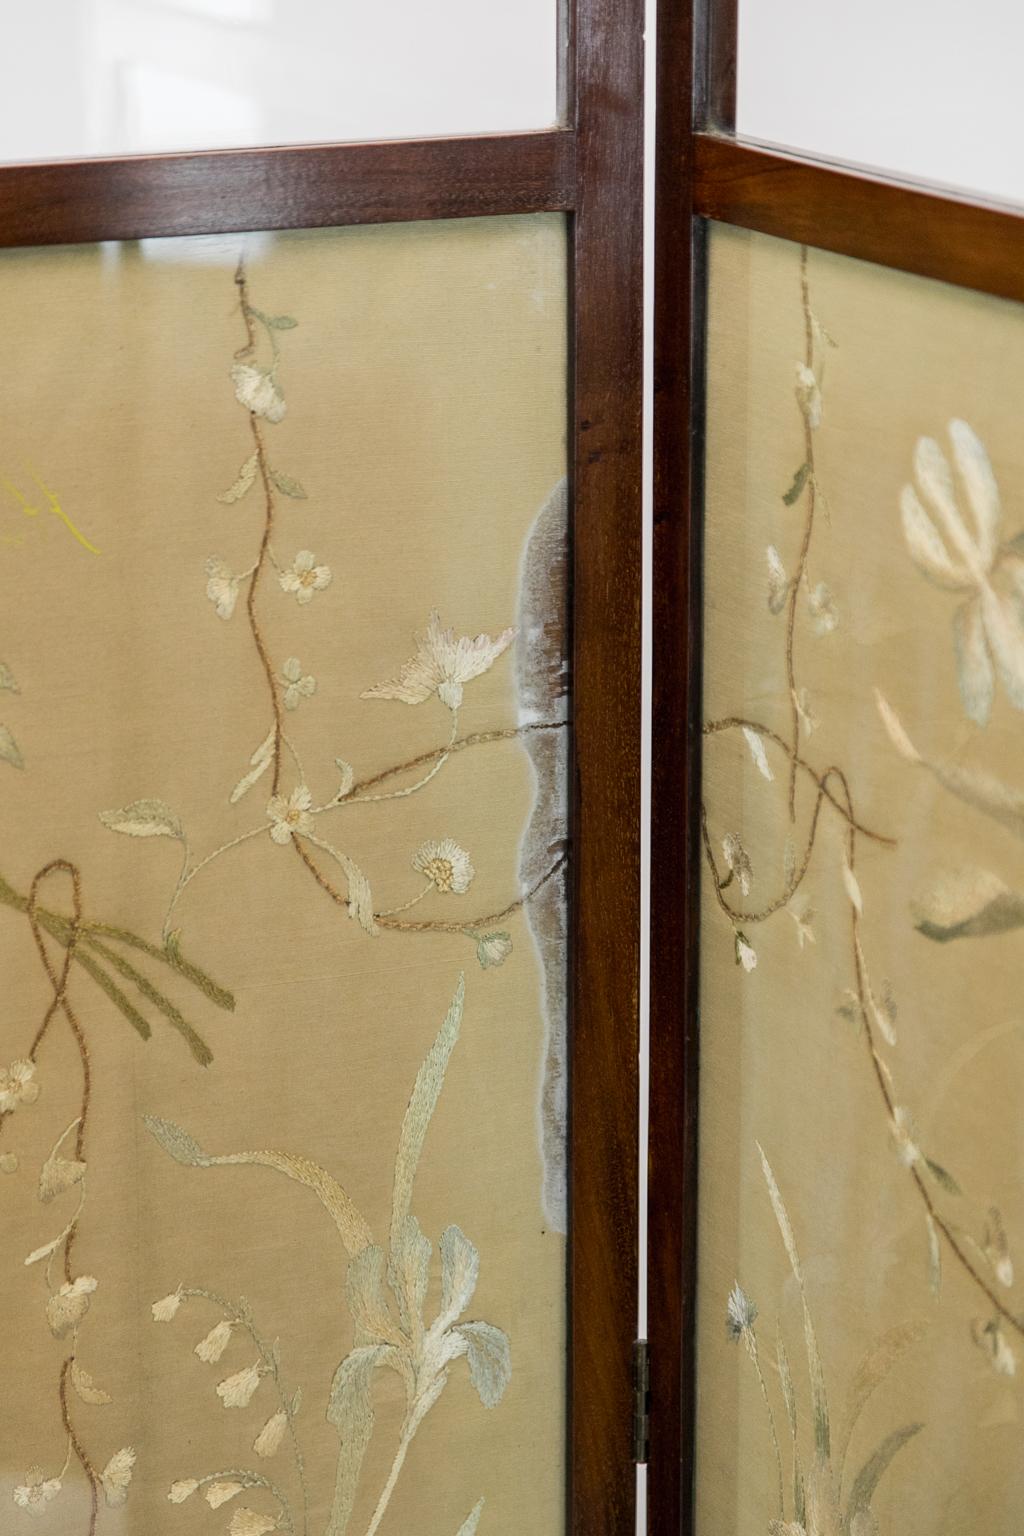 This solid mahogany folding screen has the original clear, wavy glass in the top panels. The silk needlework depicts groupings of floral vines and bundles of daisies, lily of the valley, and other flowers. The left-hand panel has a 11 1/2